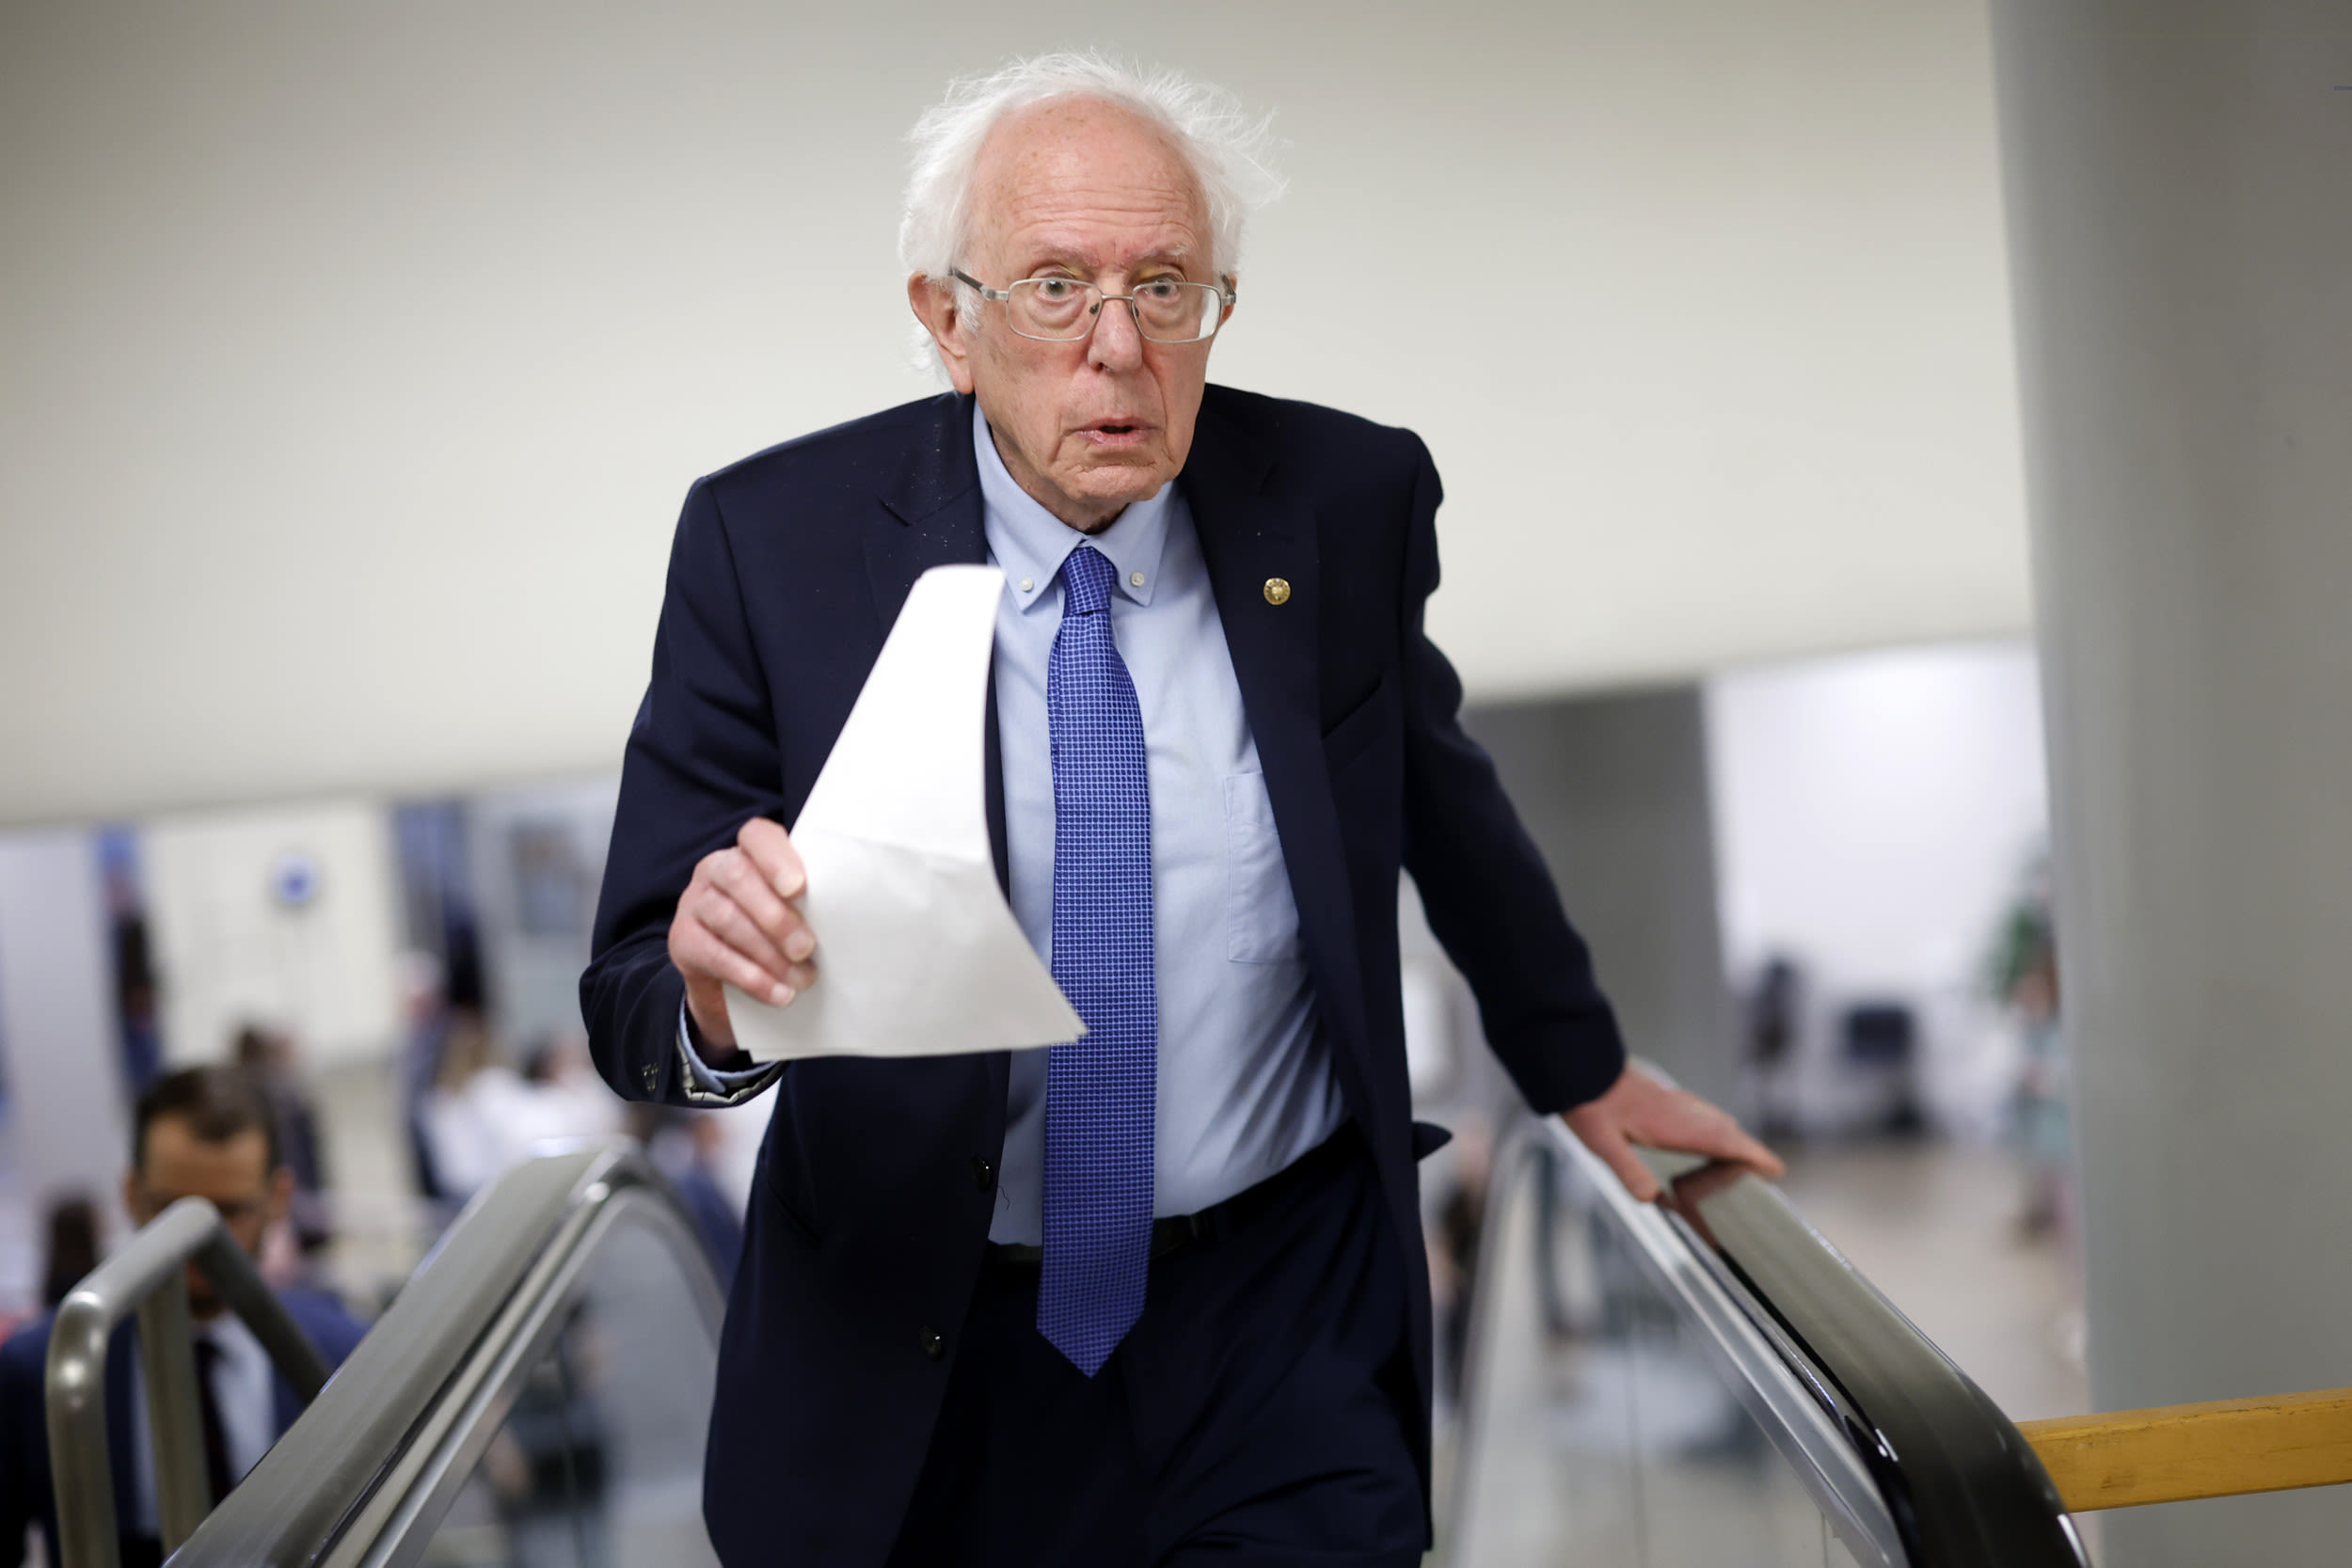 Bernie Sanders ripped for "absolutely ridiculous" reelection decision